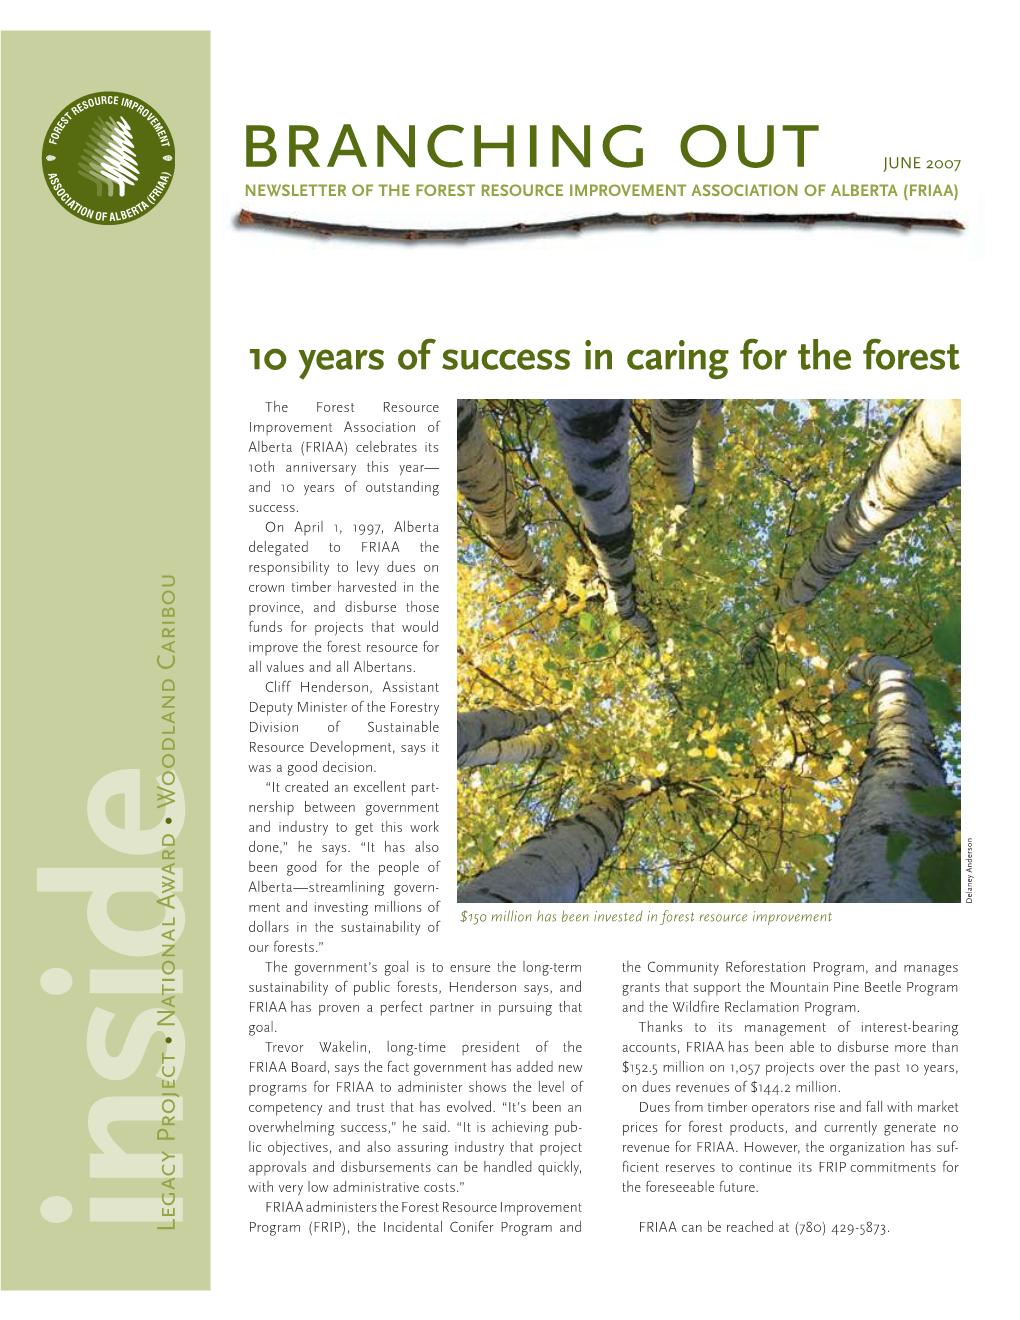 Branching out – June 2007